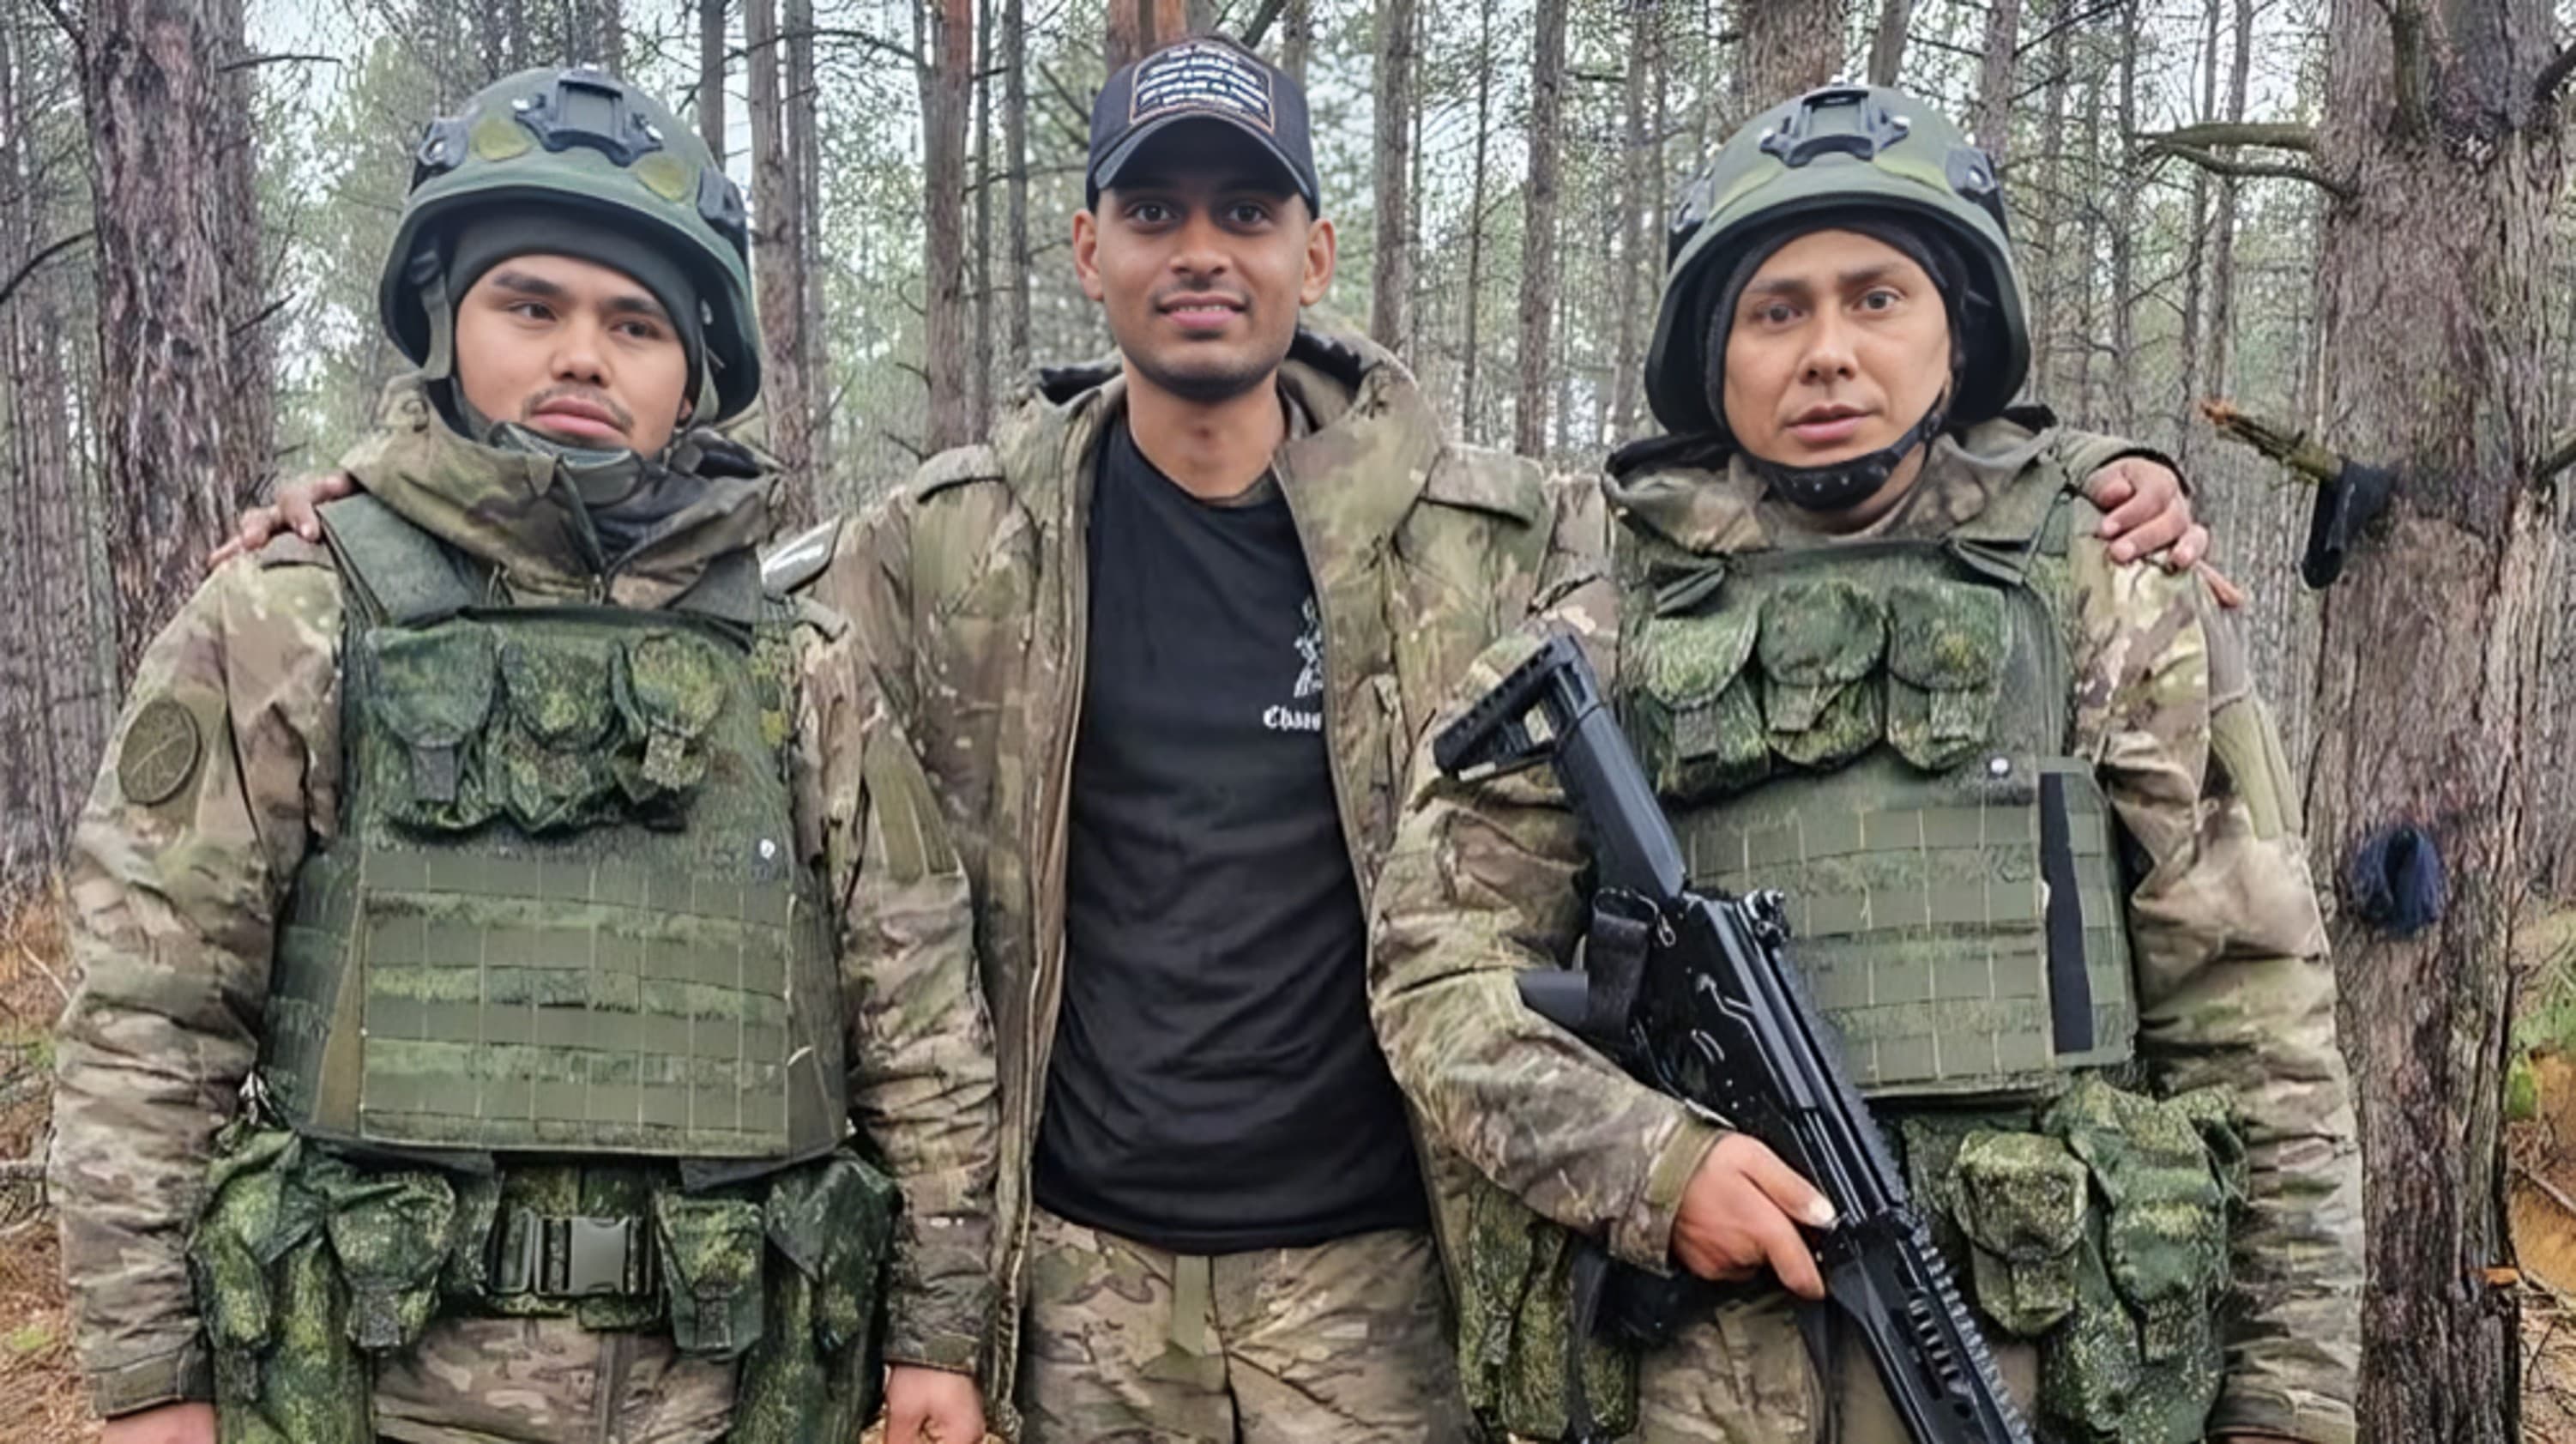 Two Indian nationals recruited by the Russian army were recently killed in the war between Russia and Ukraine, the Indian foreign ministry said on Tuesday. (Reuters/File)